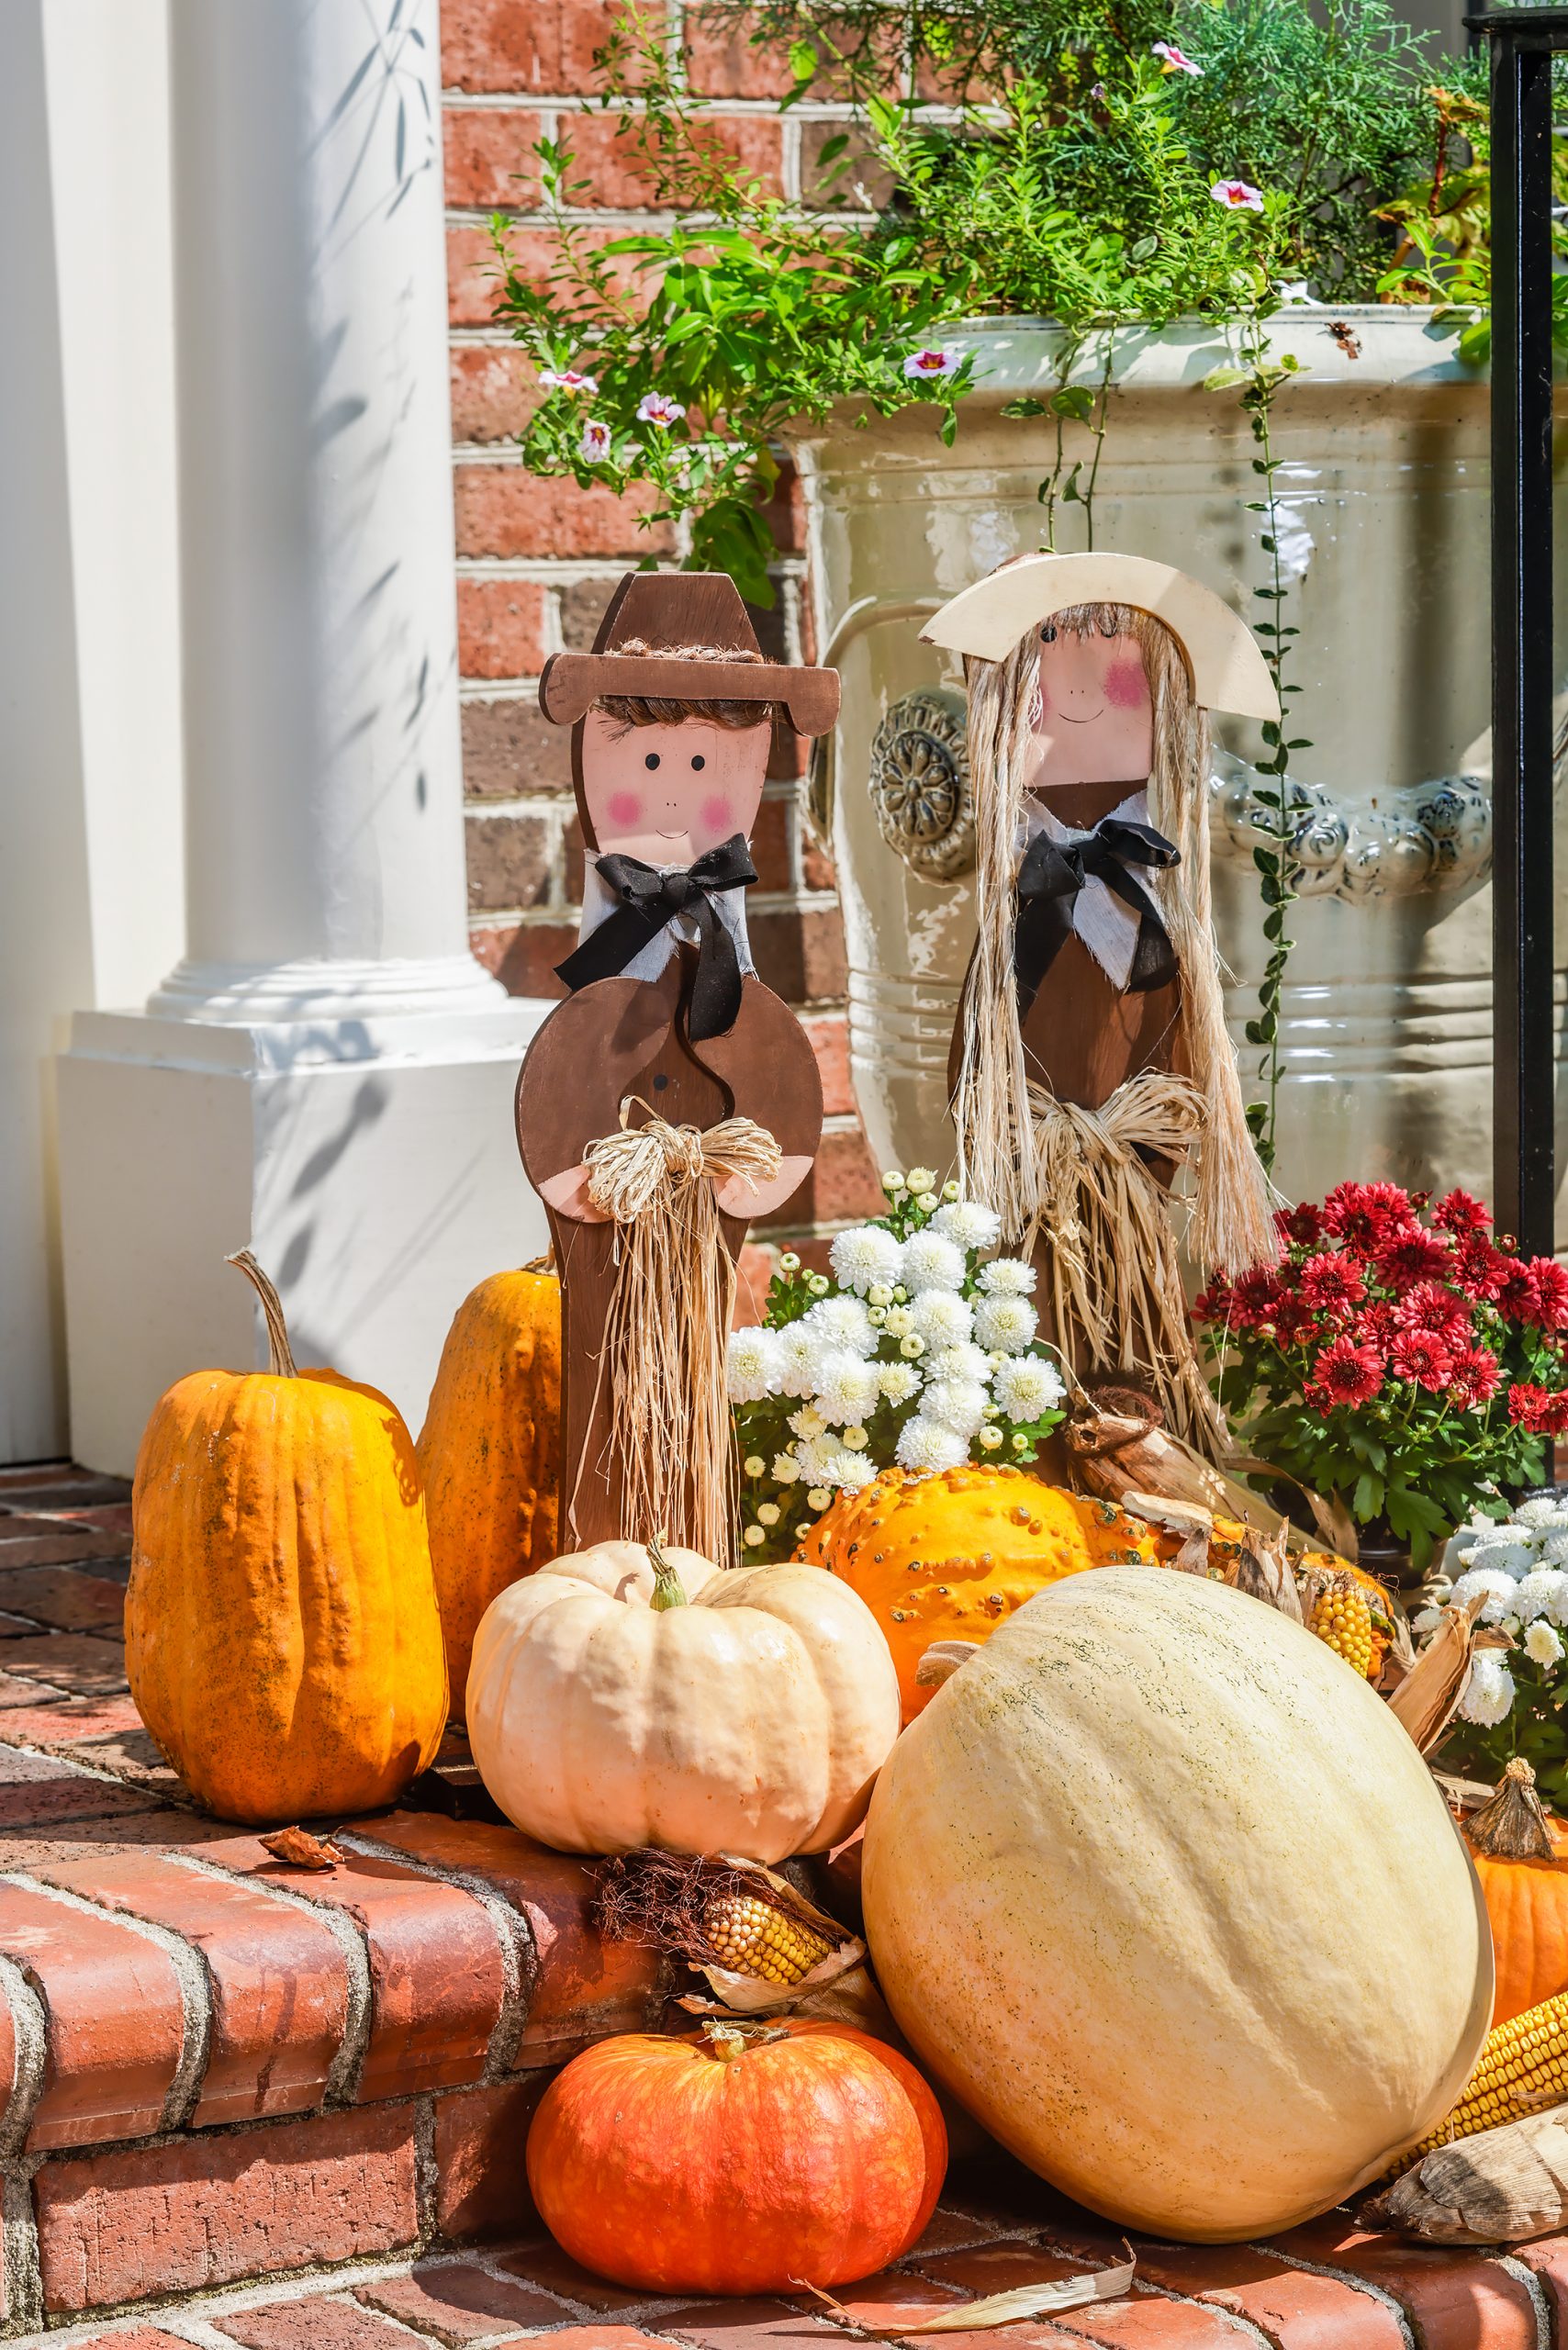  The entrance is a wonderful place to arrange traditional Thanksgiving decorations, like Pilgrims, colorful gourds, Indian corn, hay bales and potted mums — all easily collected and assembled. Repetition is good and highlights the reason for gathering!
